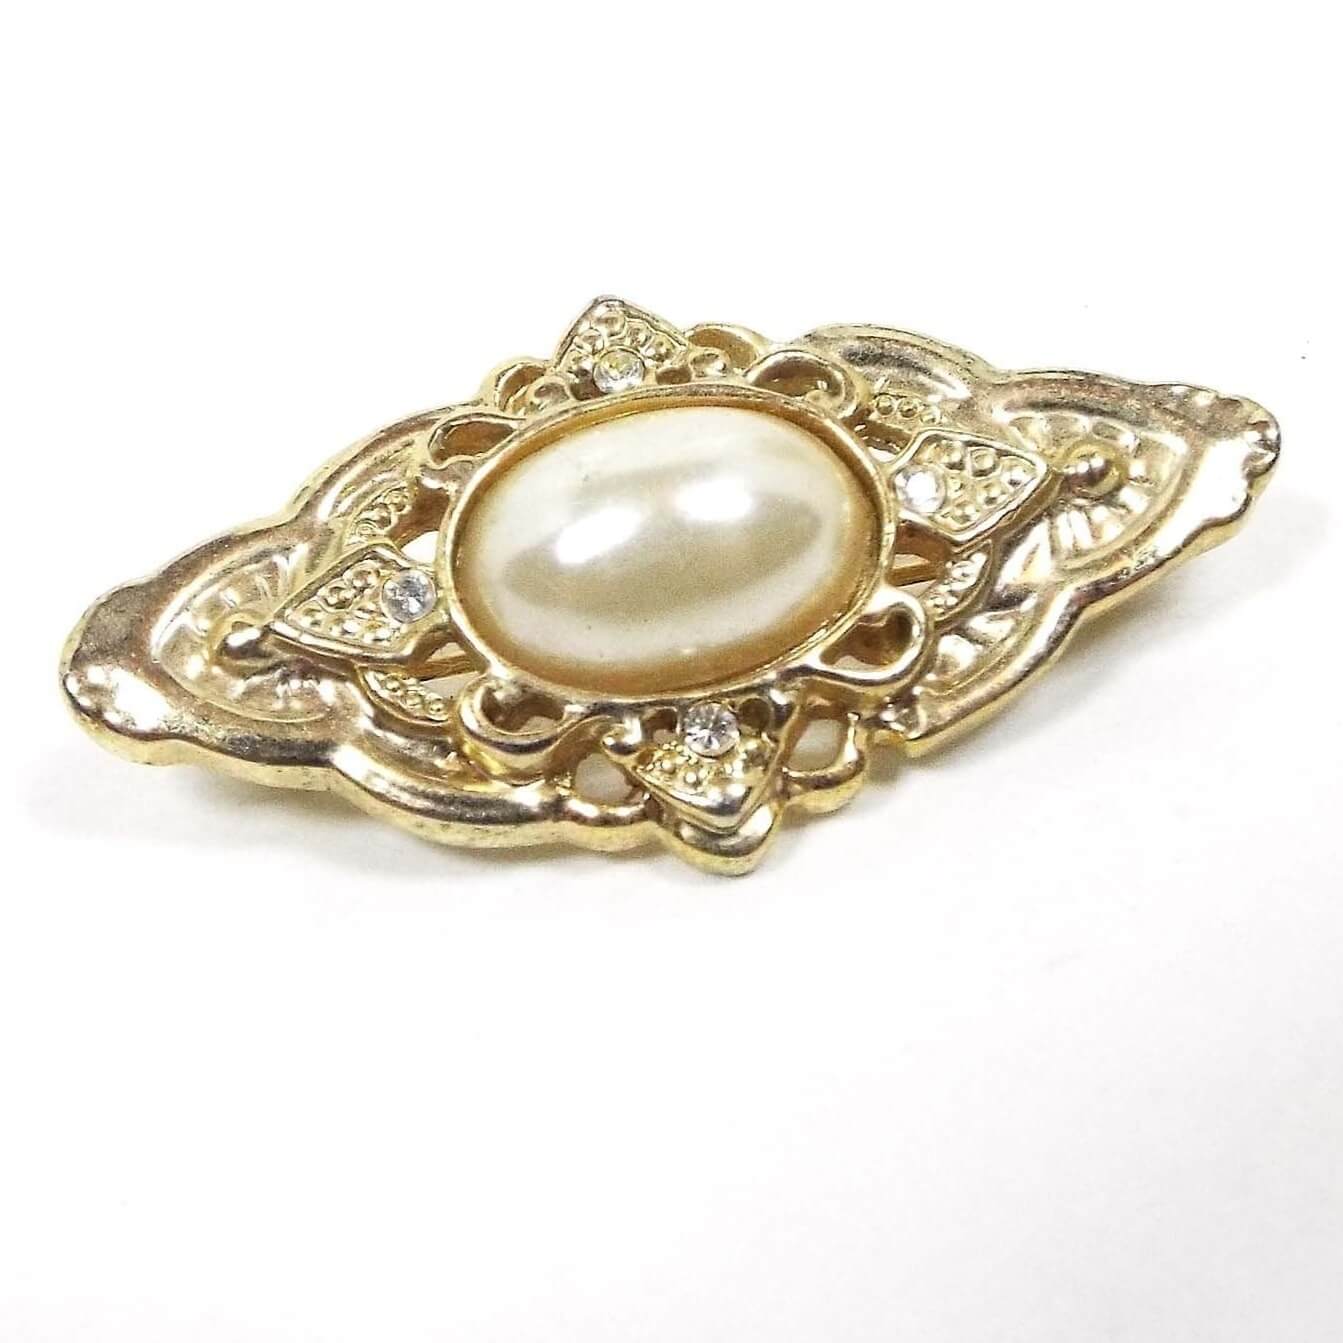 Front view of the retro vintage faux pearl brooch pin. The brooch metal is gold tone in color and has a large marquis like shape. There is a domed oval plastic imitation pearl in the middle. The rest of the brooch has a cut out filigree style design of differing shapes and patterns.